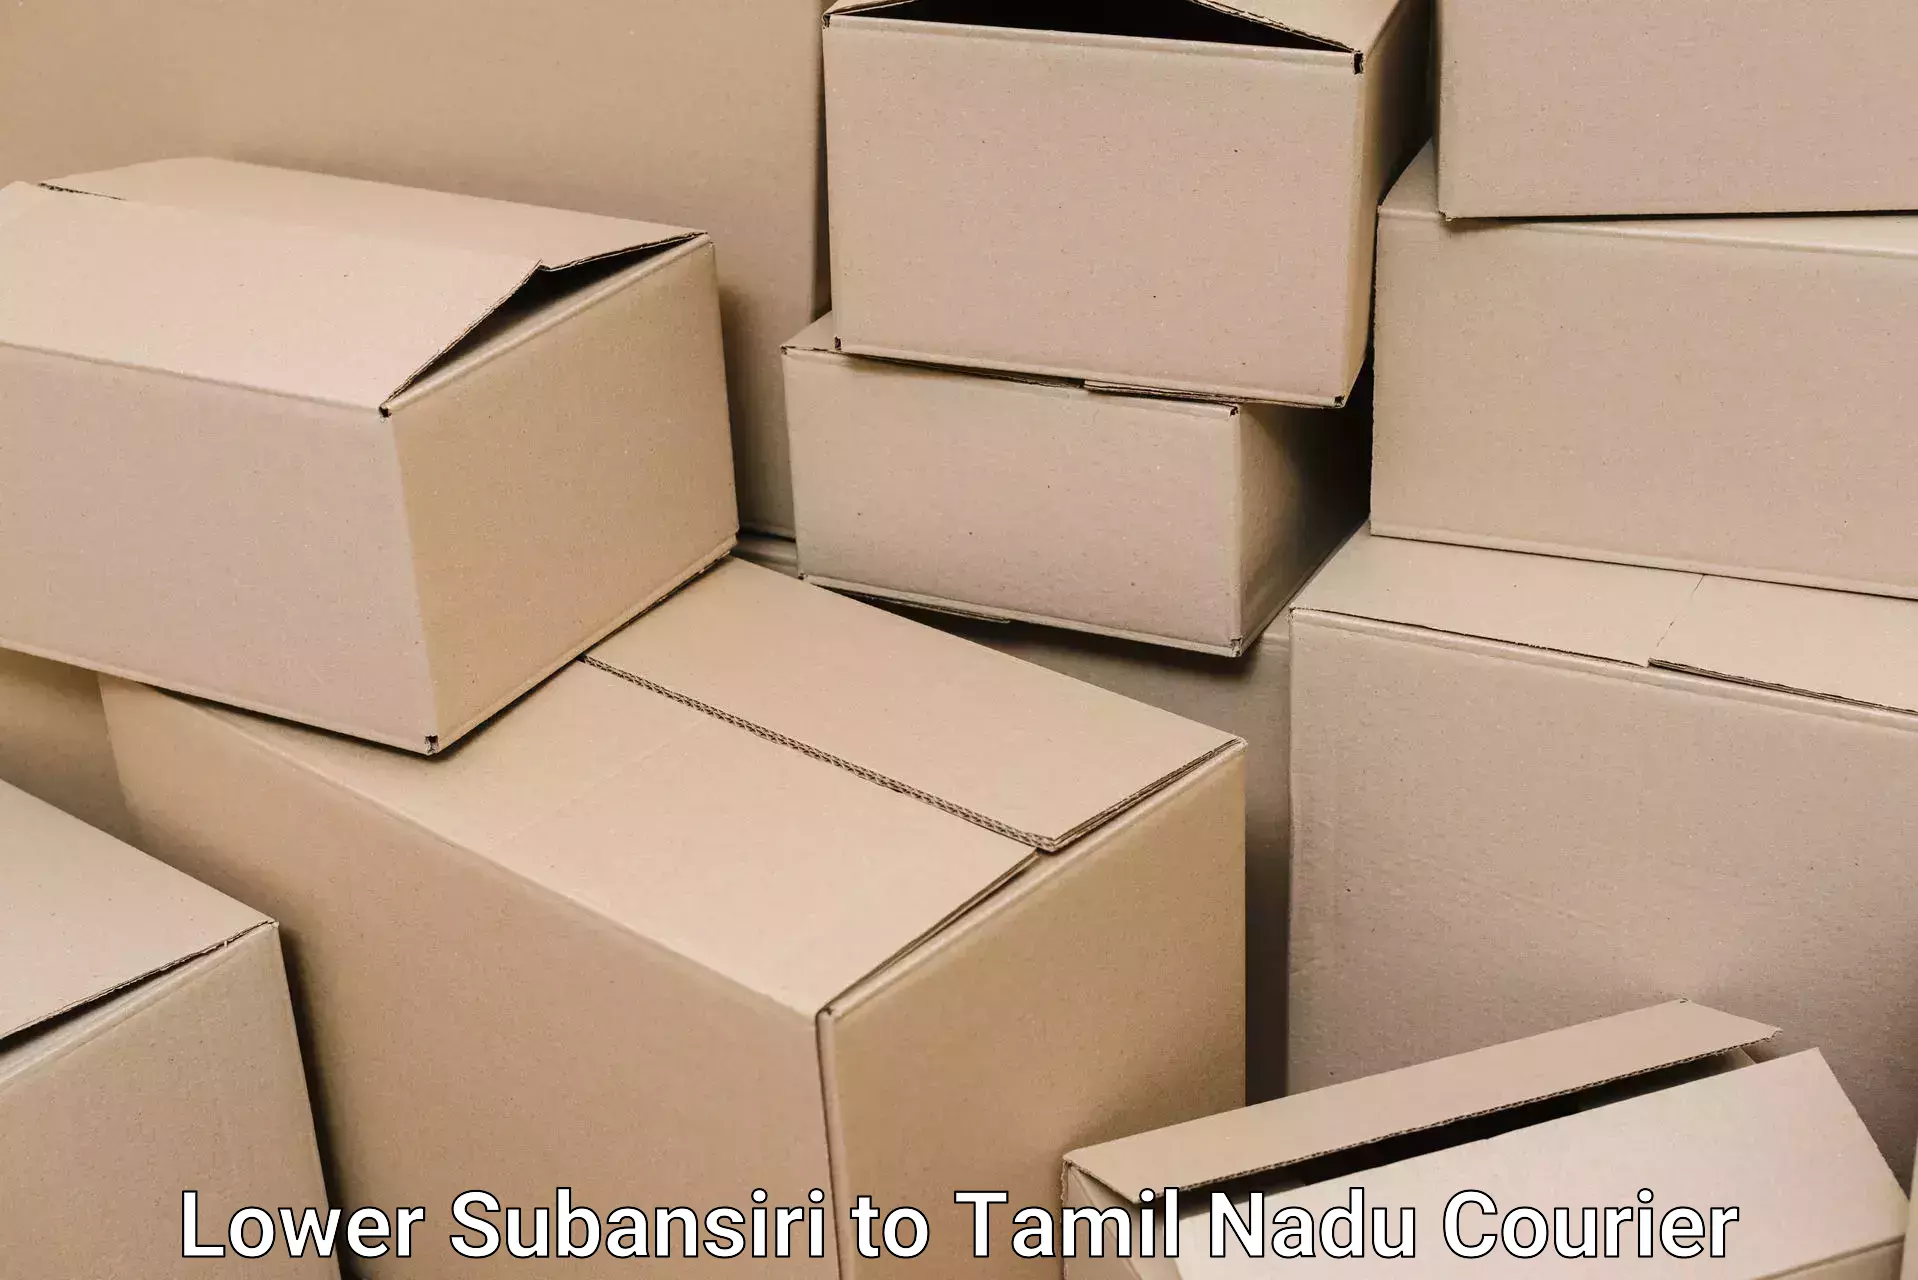 Cost-effective moving solutions Lower Subansiri to Tamil Nadu